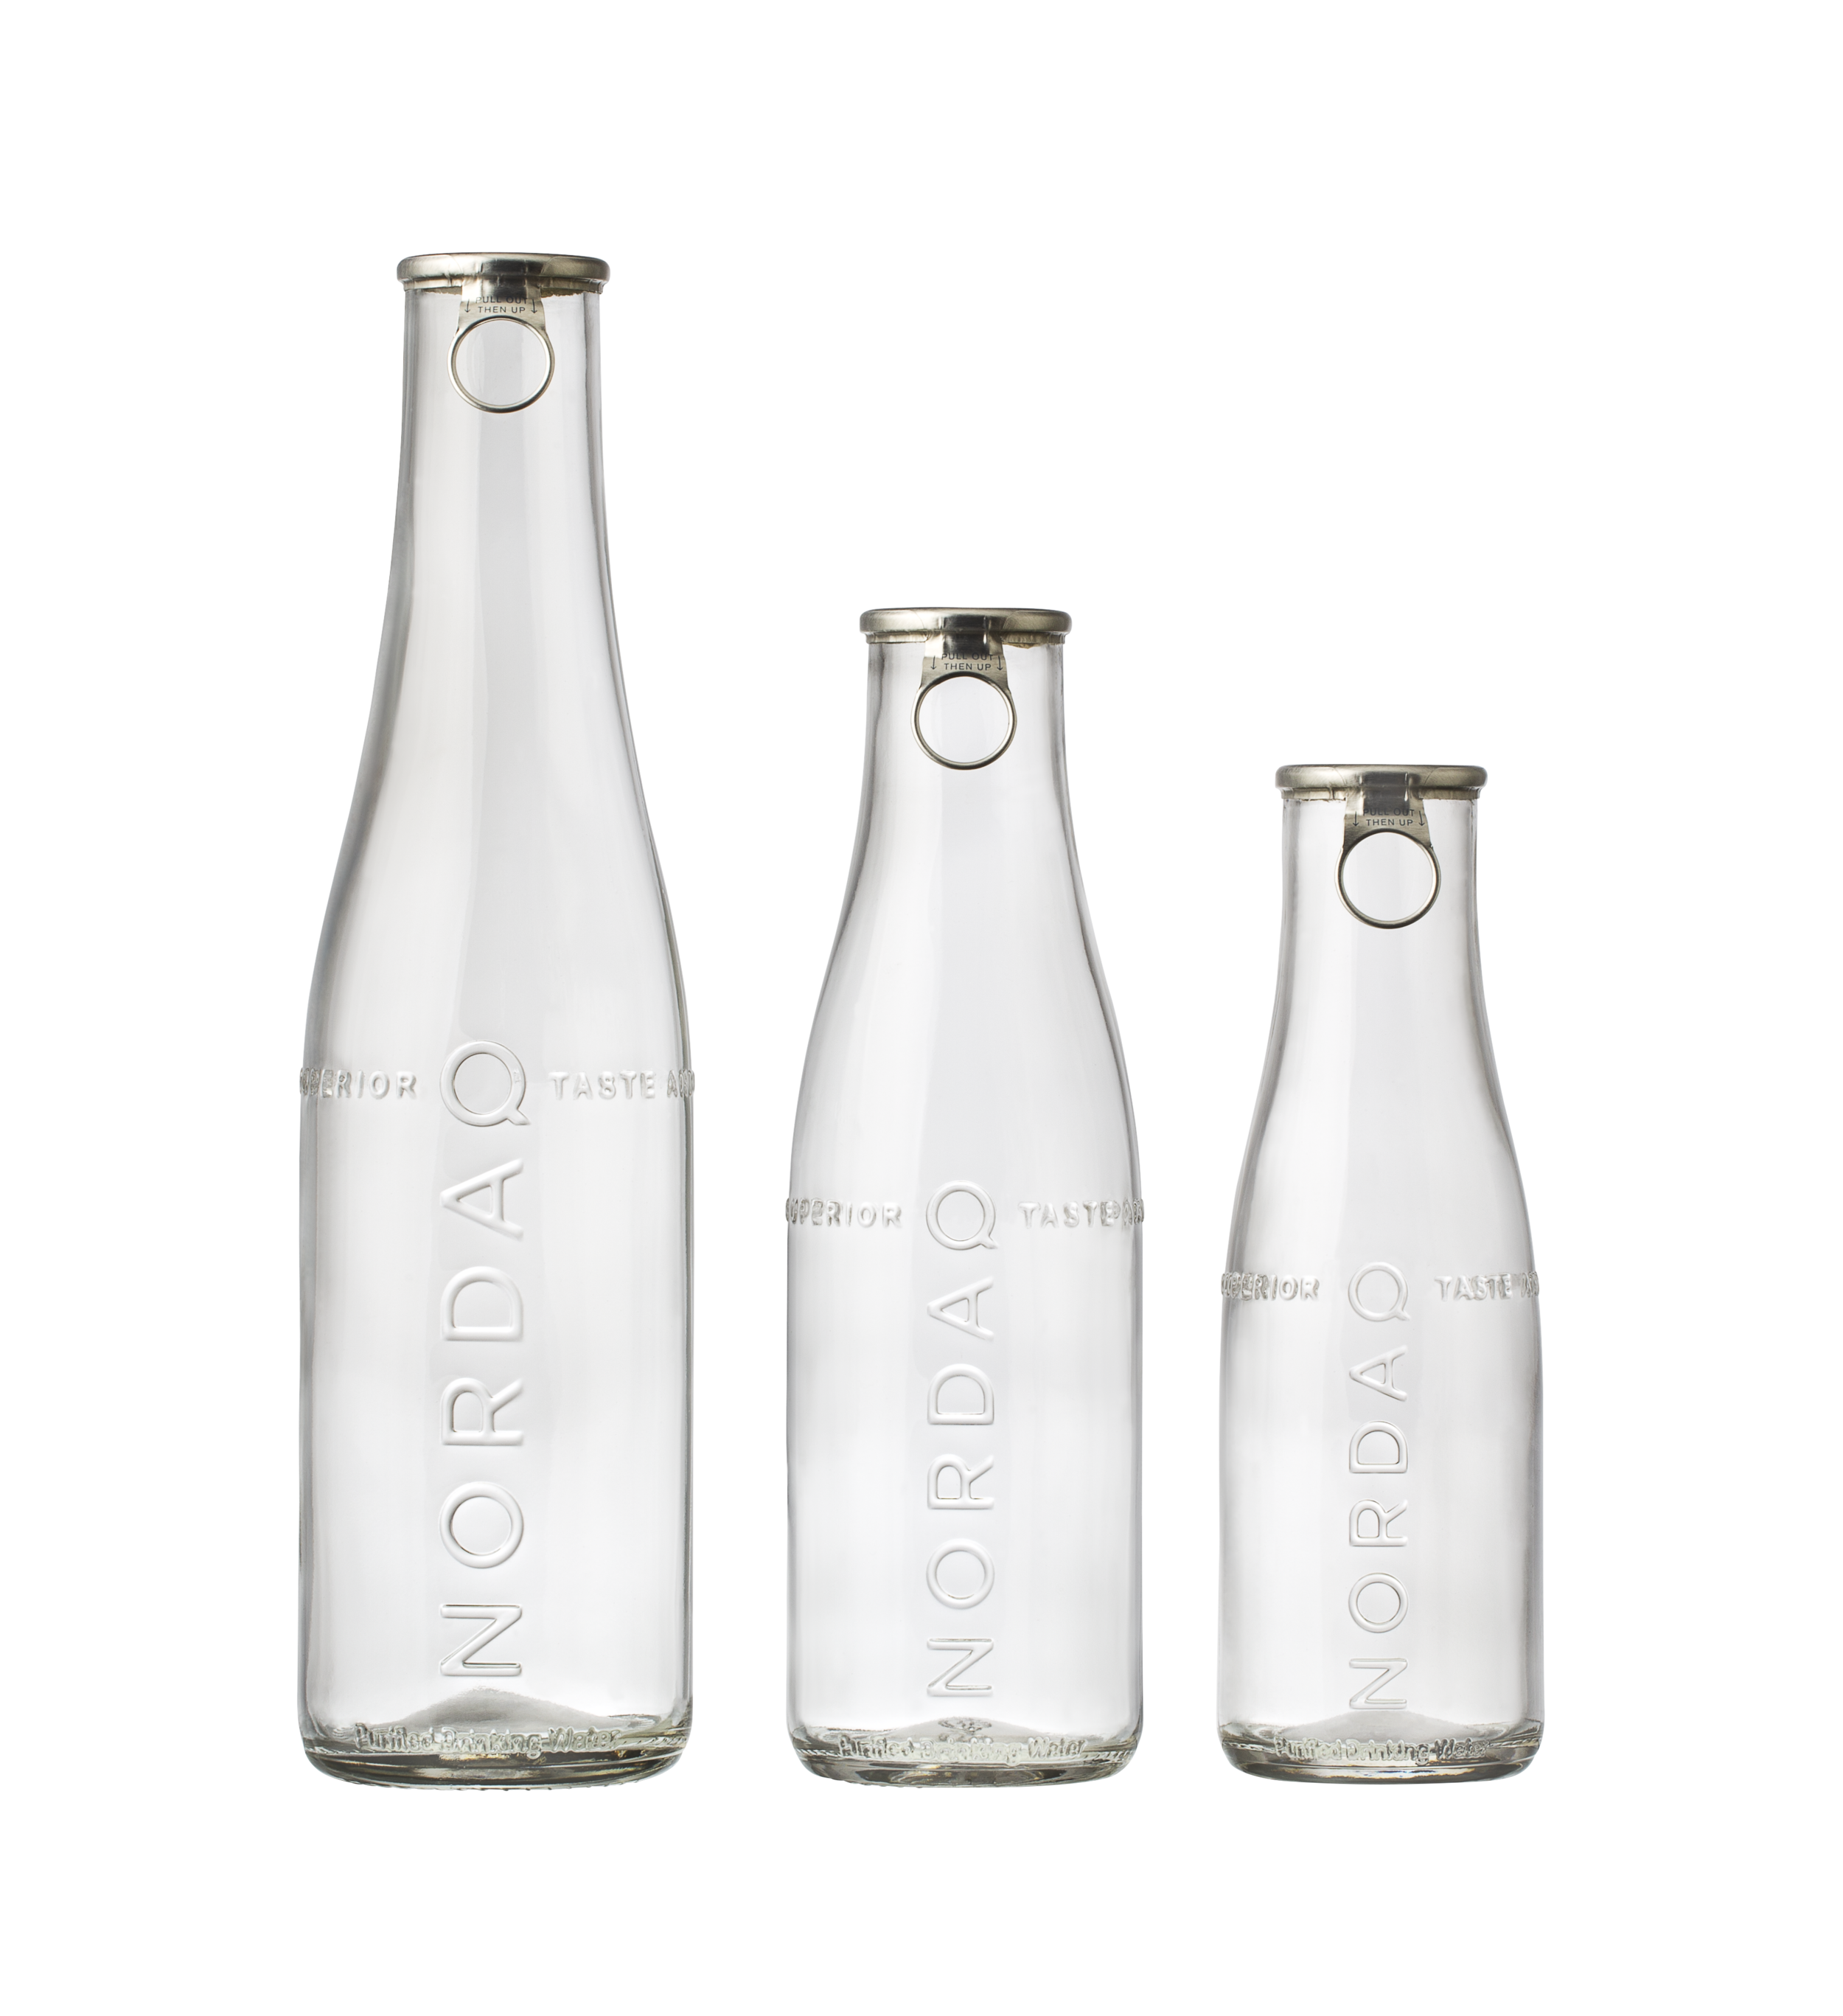 The Nordaq bottle.png